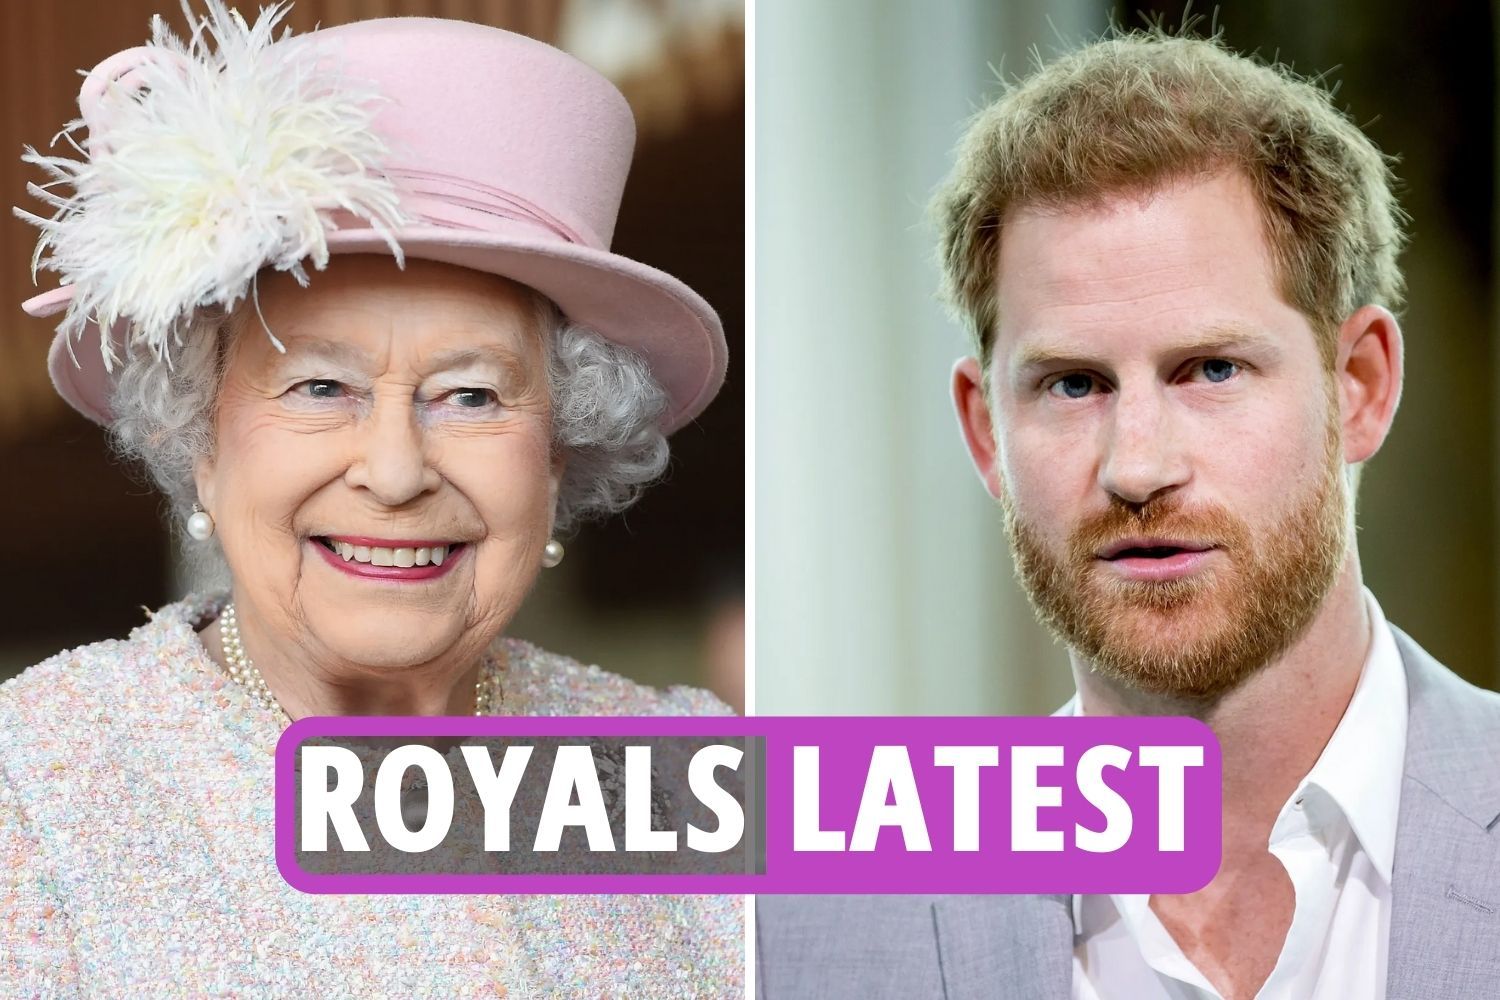 Royal family news: Harry and Meghan are set to return to the UK, where the Queen will finally meet Lillibit during the Jubilee holidays.